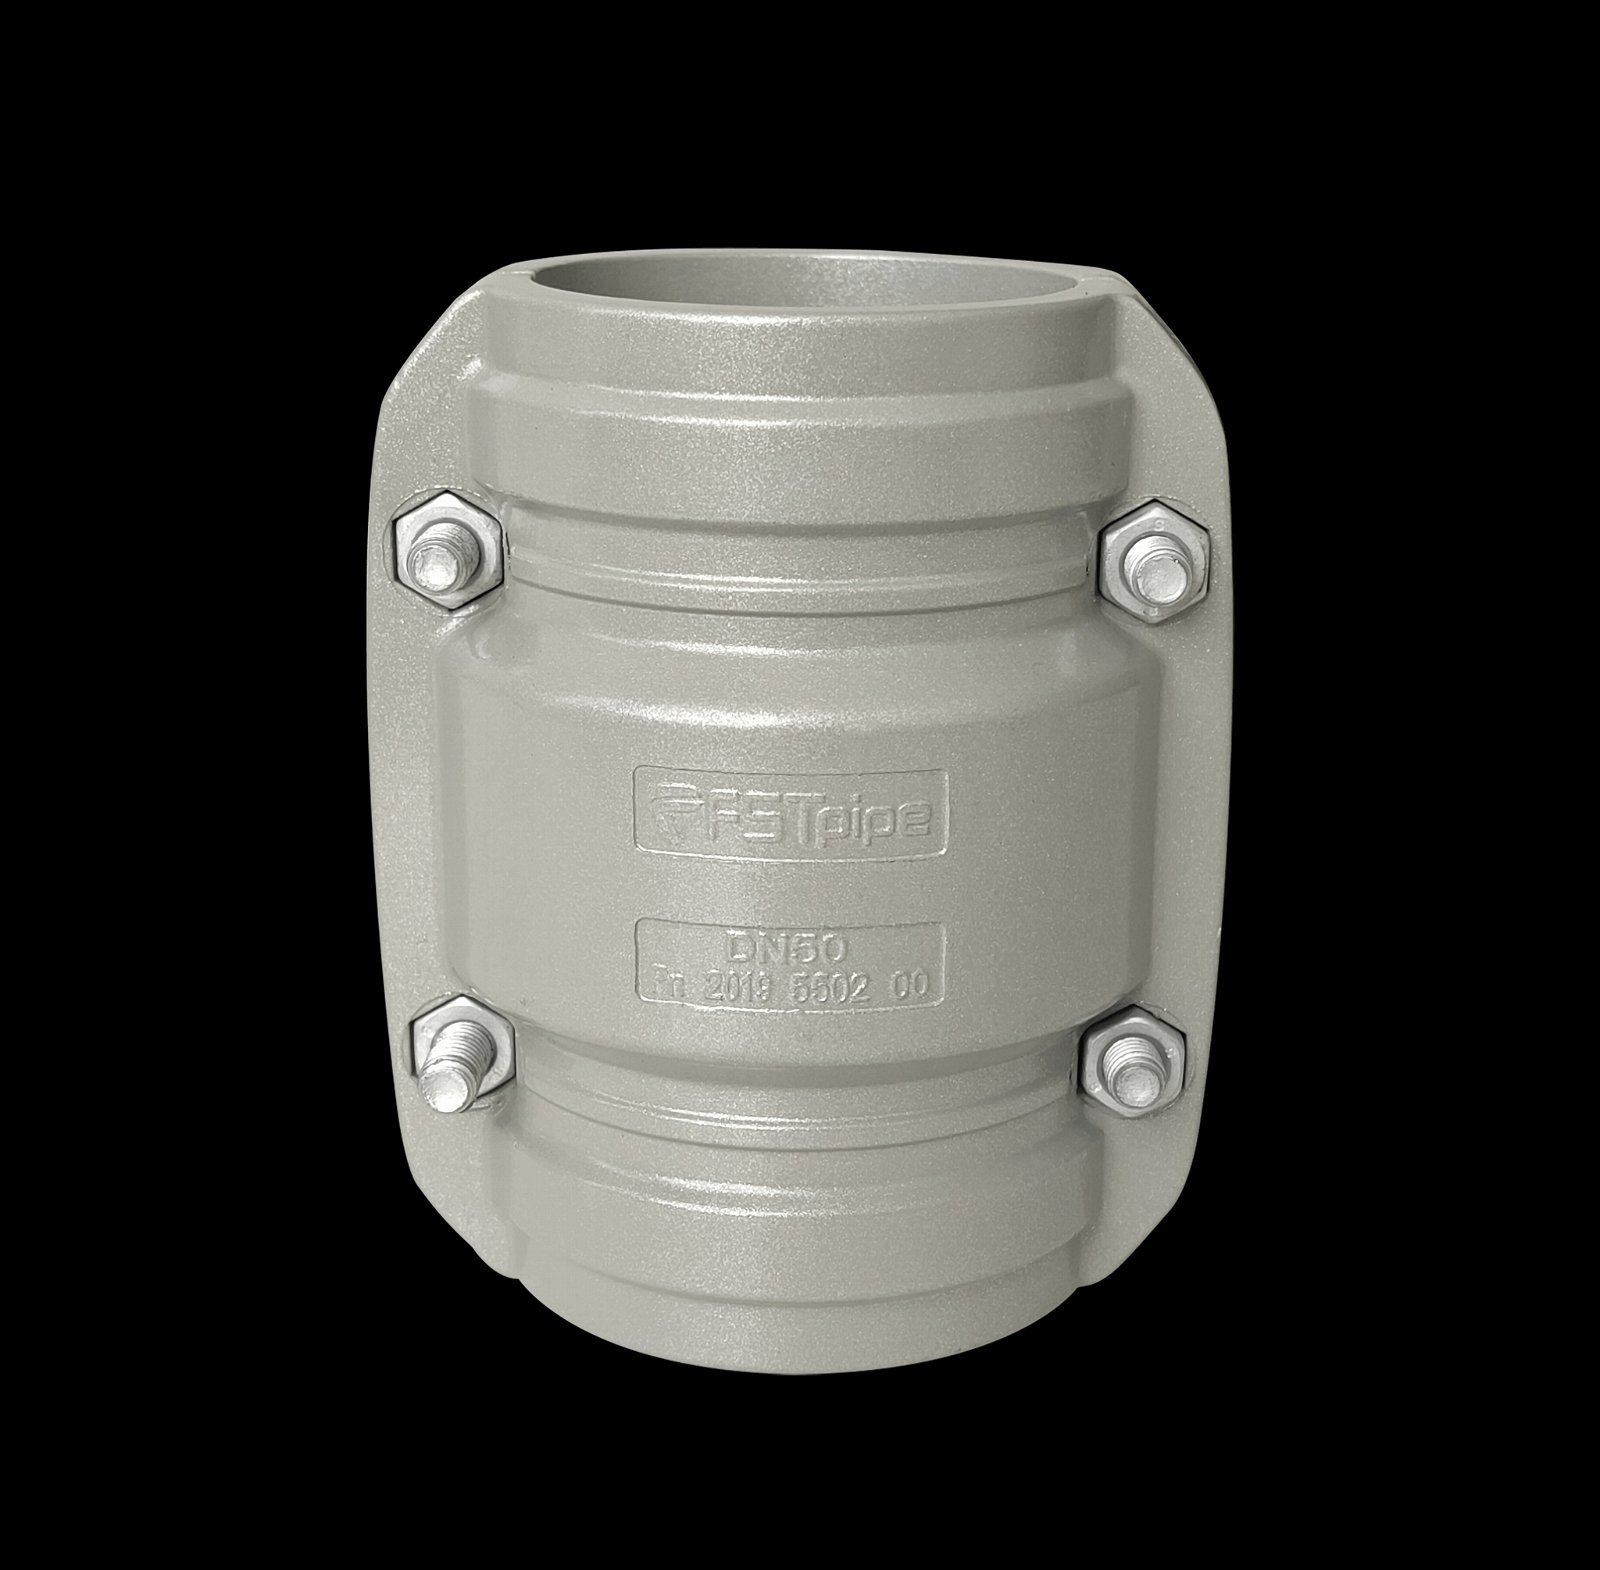 FSTpipe Equal Socket for compressed air piping system 2